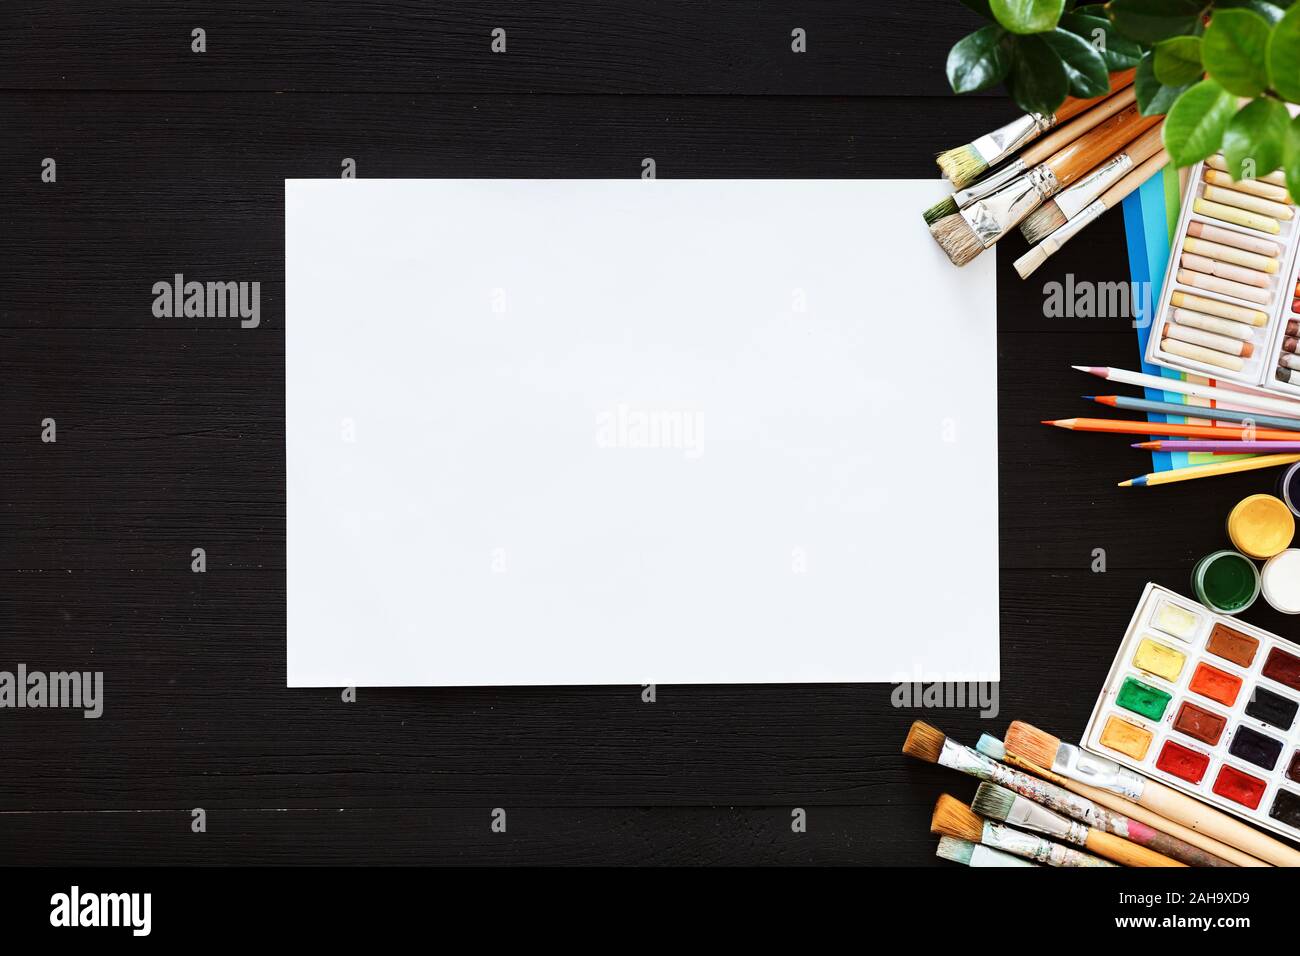 Creative paint background supplies paper brushes paintbox on black wood desk Stock Photo